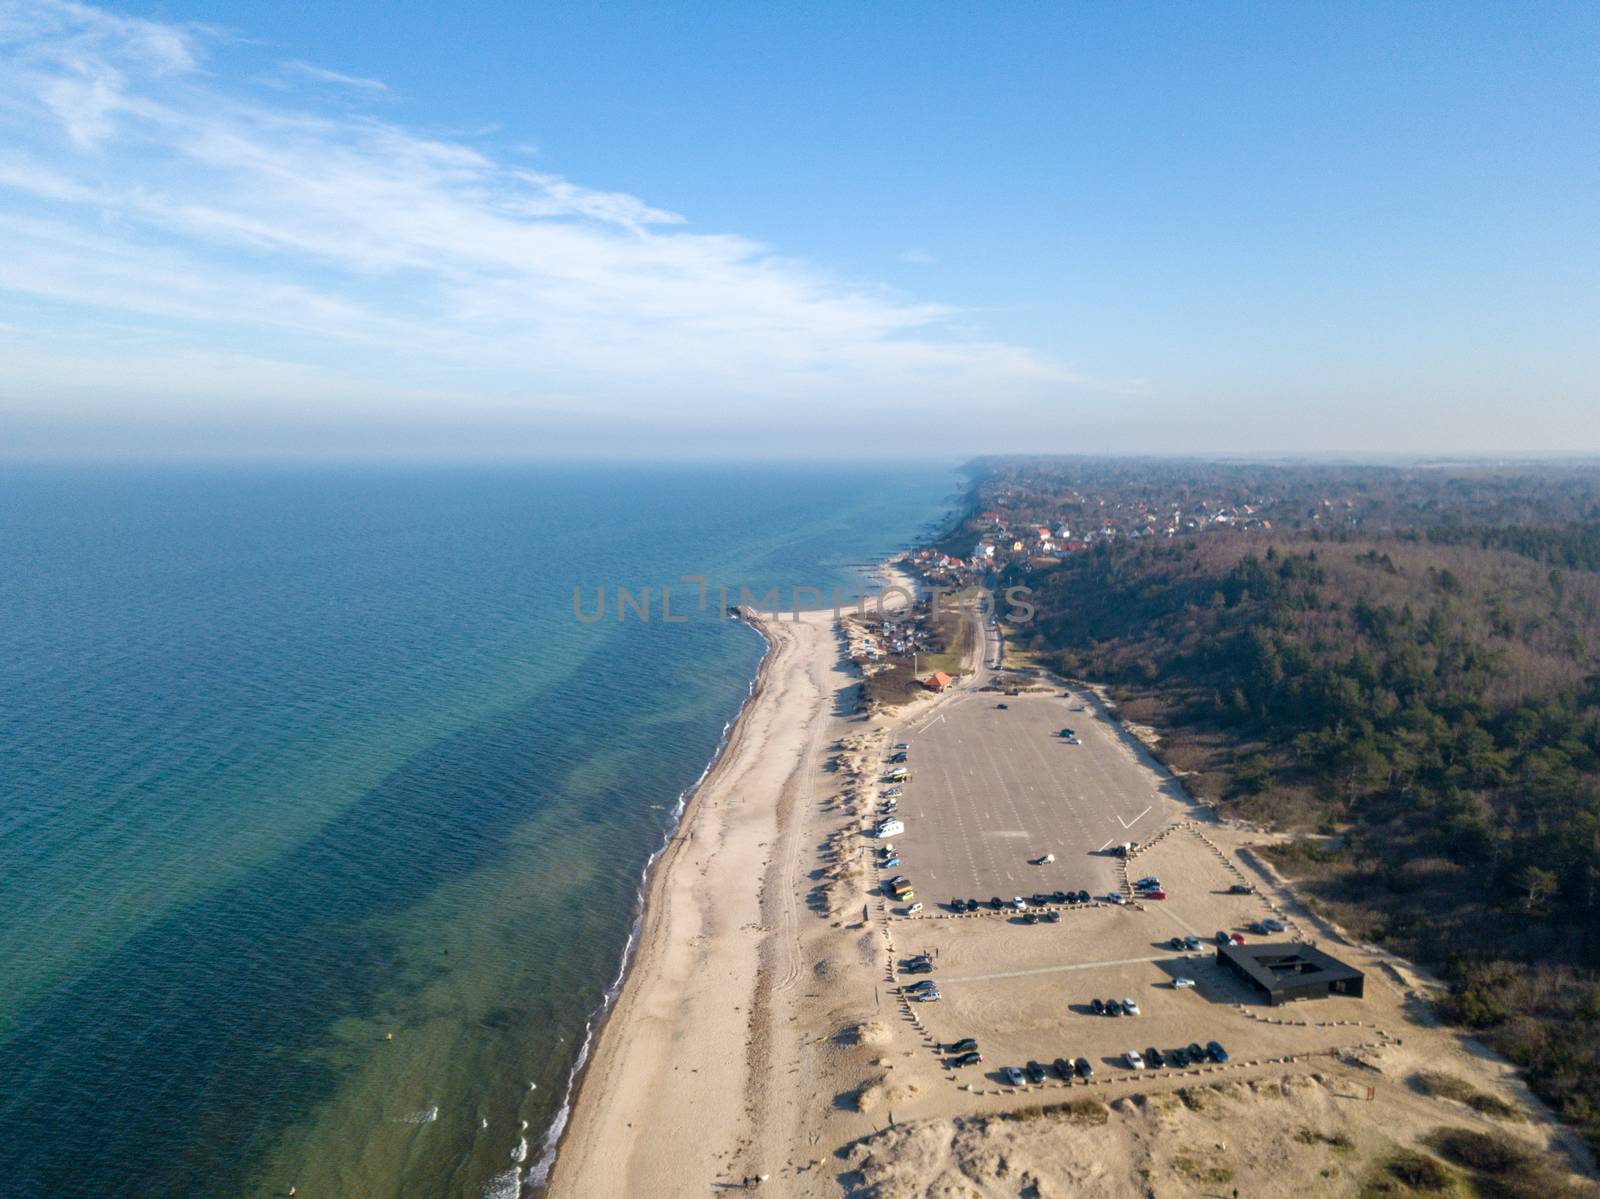 Tisvildeleje, Denmark - February 24, 2019: Aerial drone  view of the coastline with the public parking lot at the beach.